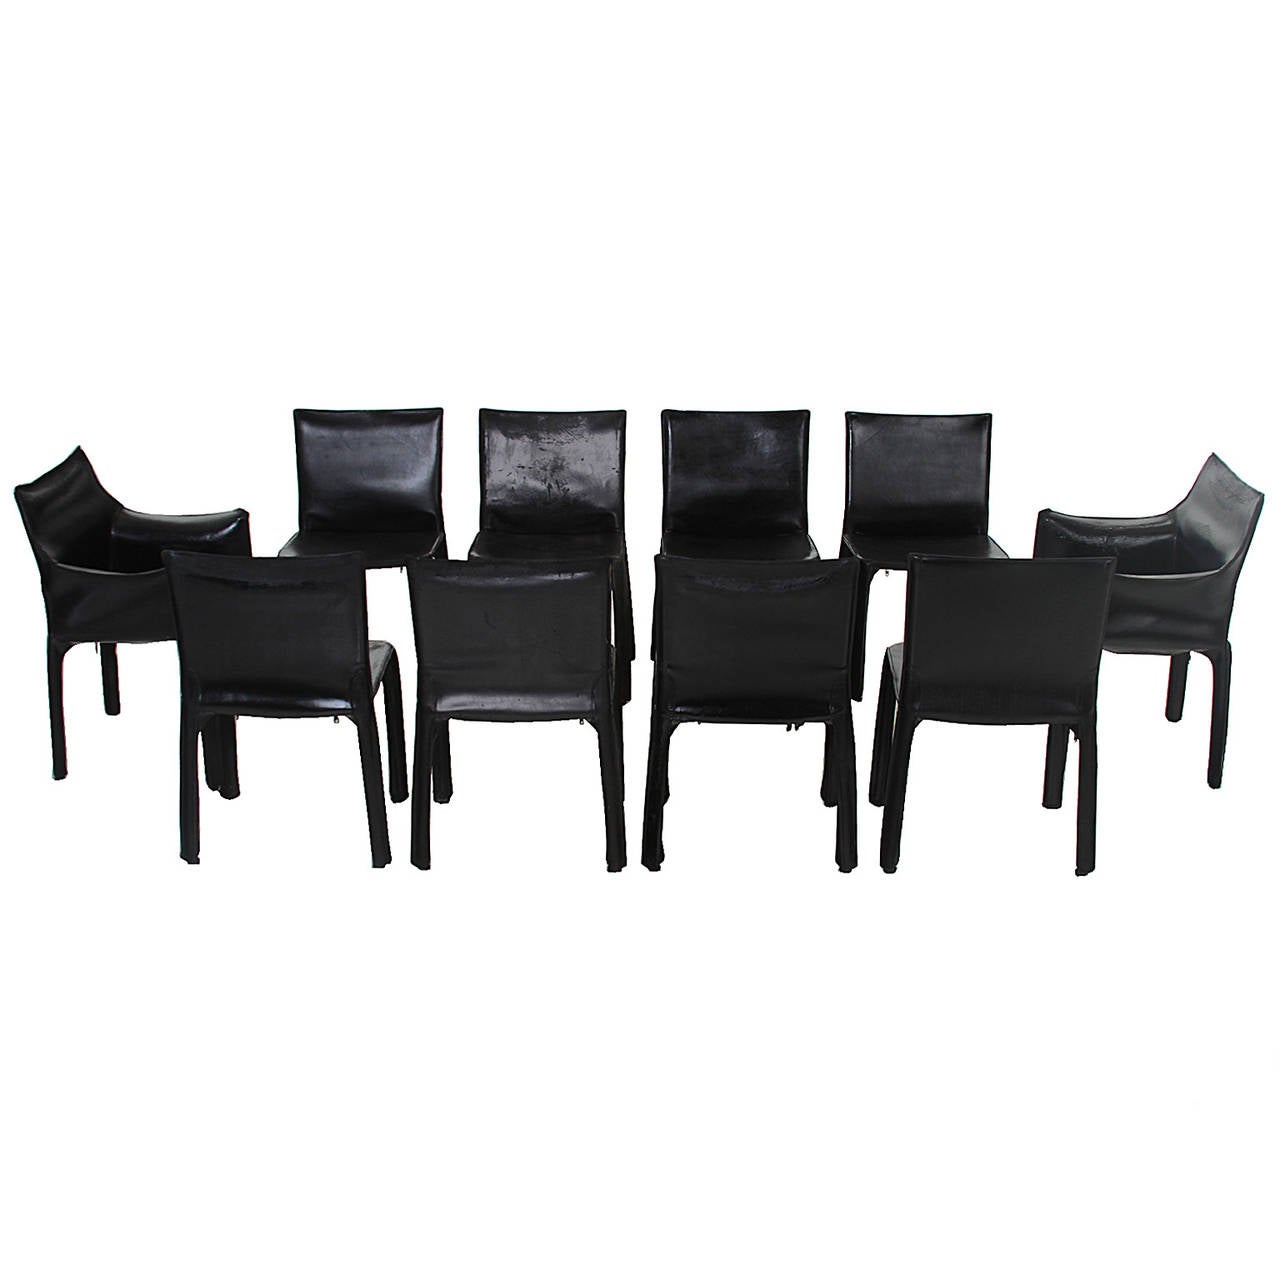 A beautiful set of eight dining chairs and two head chairs from Brazil. The chairs are very simply designed and have an elegant look. The chairs are upholstered in an aged leather and have a zipper underneath to remove the leather.

These chairs